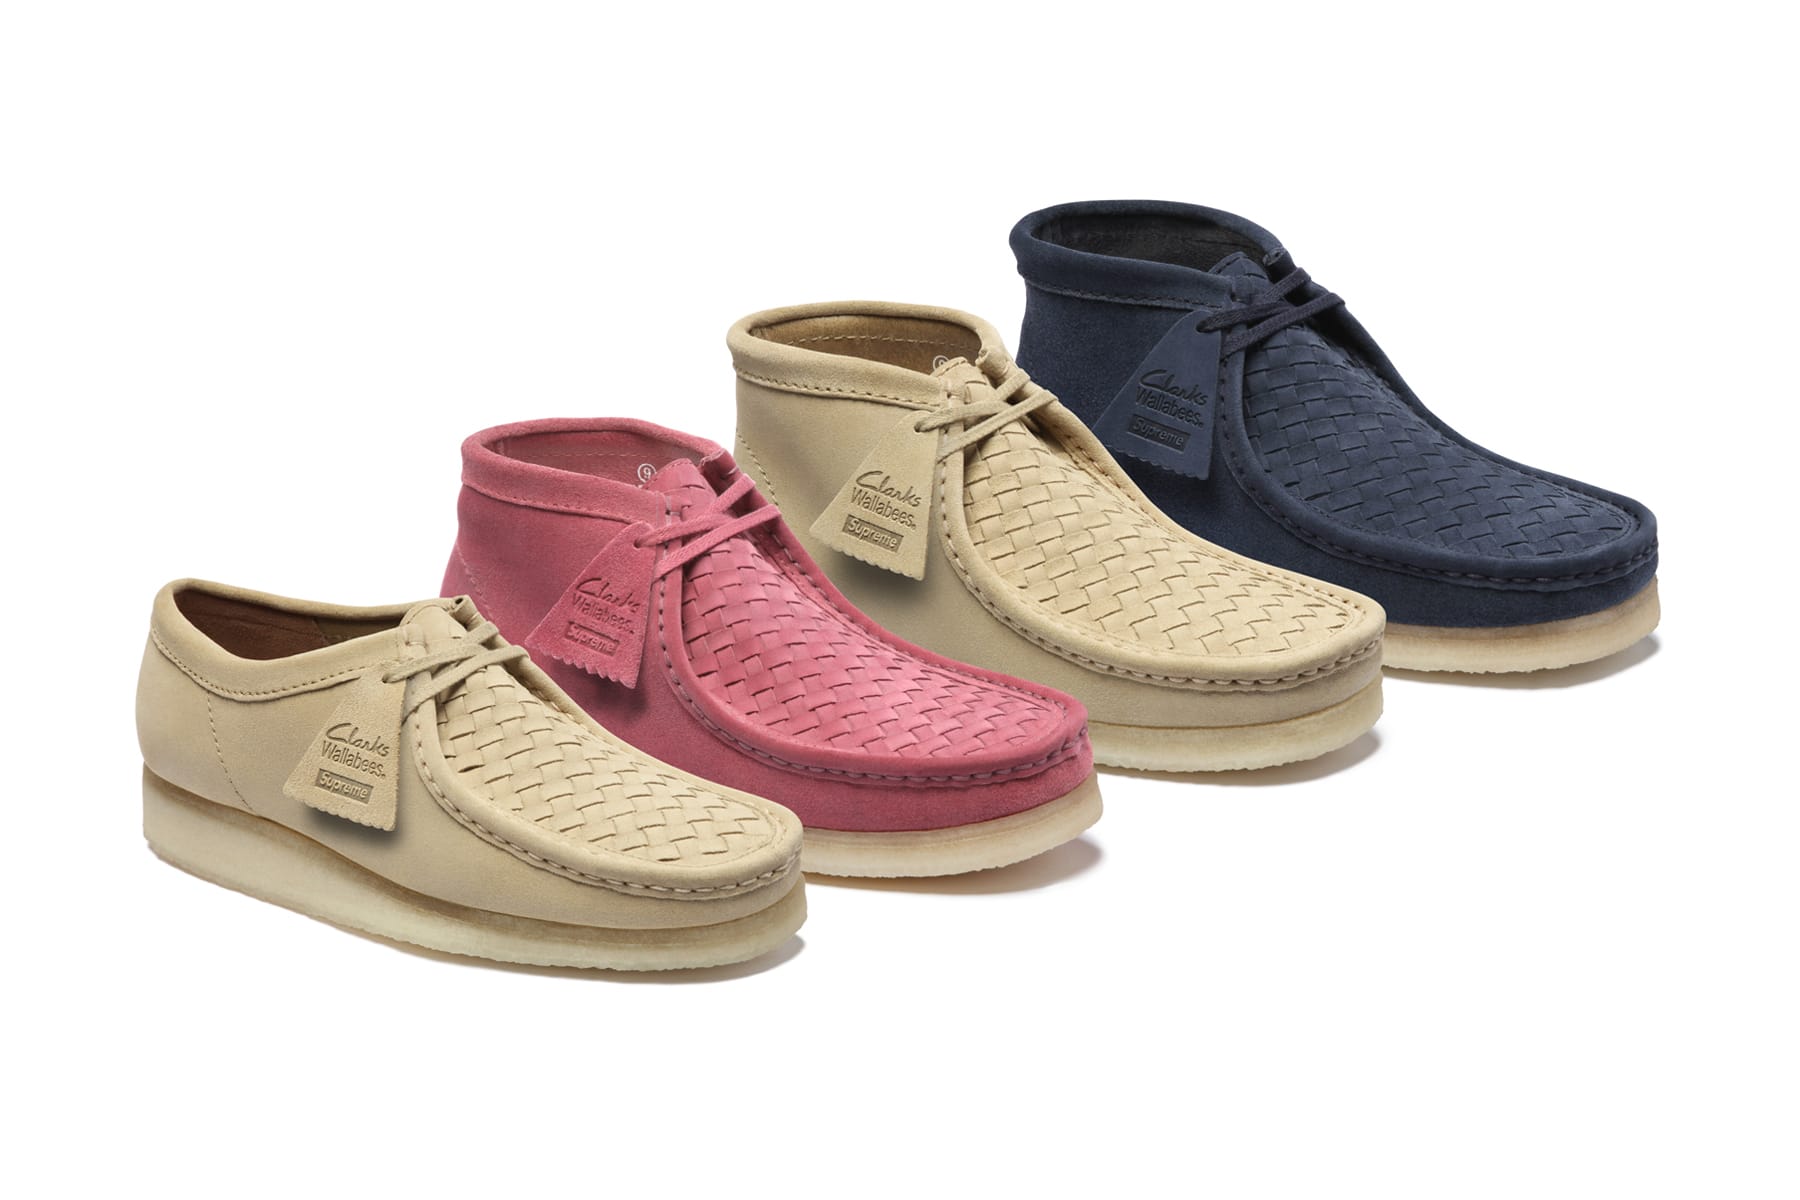 Supreme x Clarks 2016 Spring/Summer Collection | Hypebeast